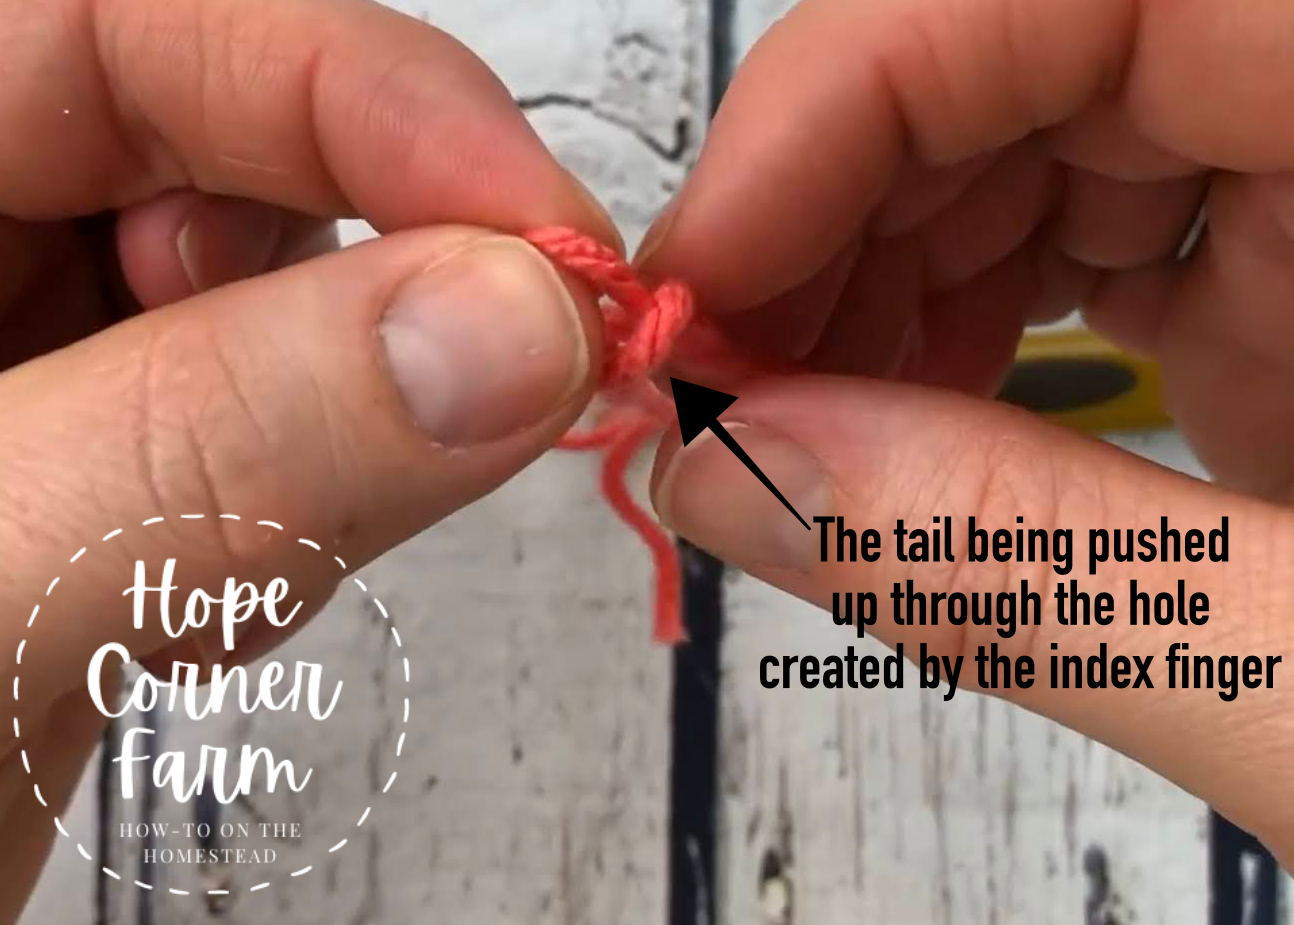 Grab onto the slip knot as it comes through the hole